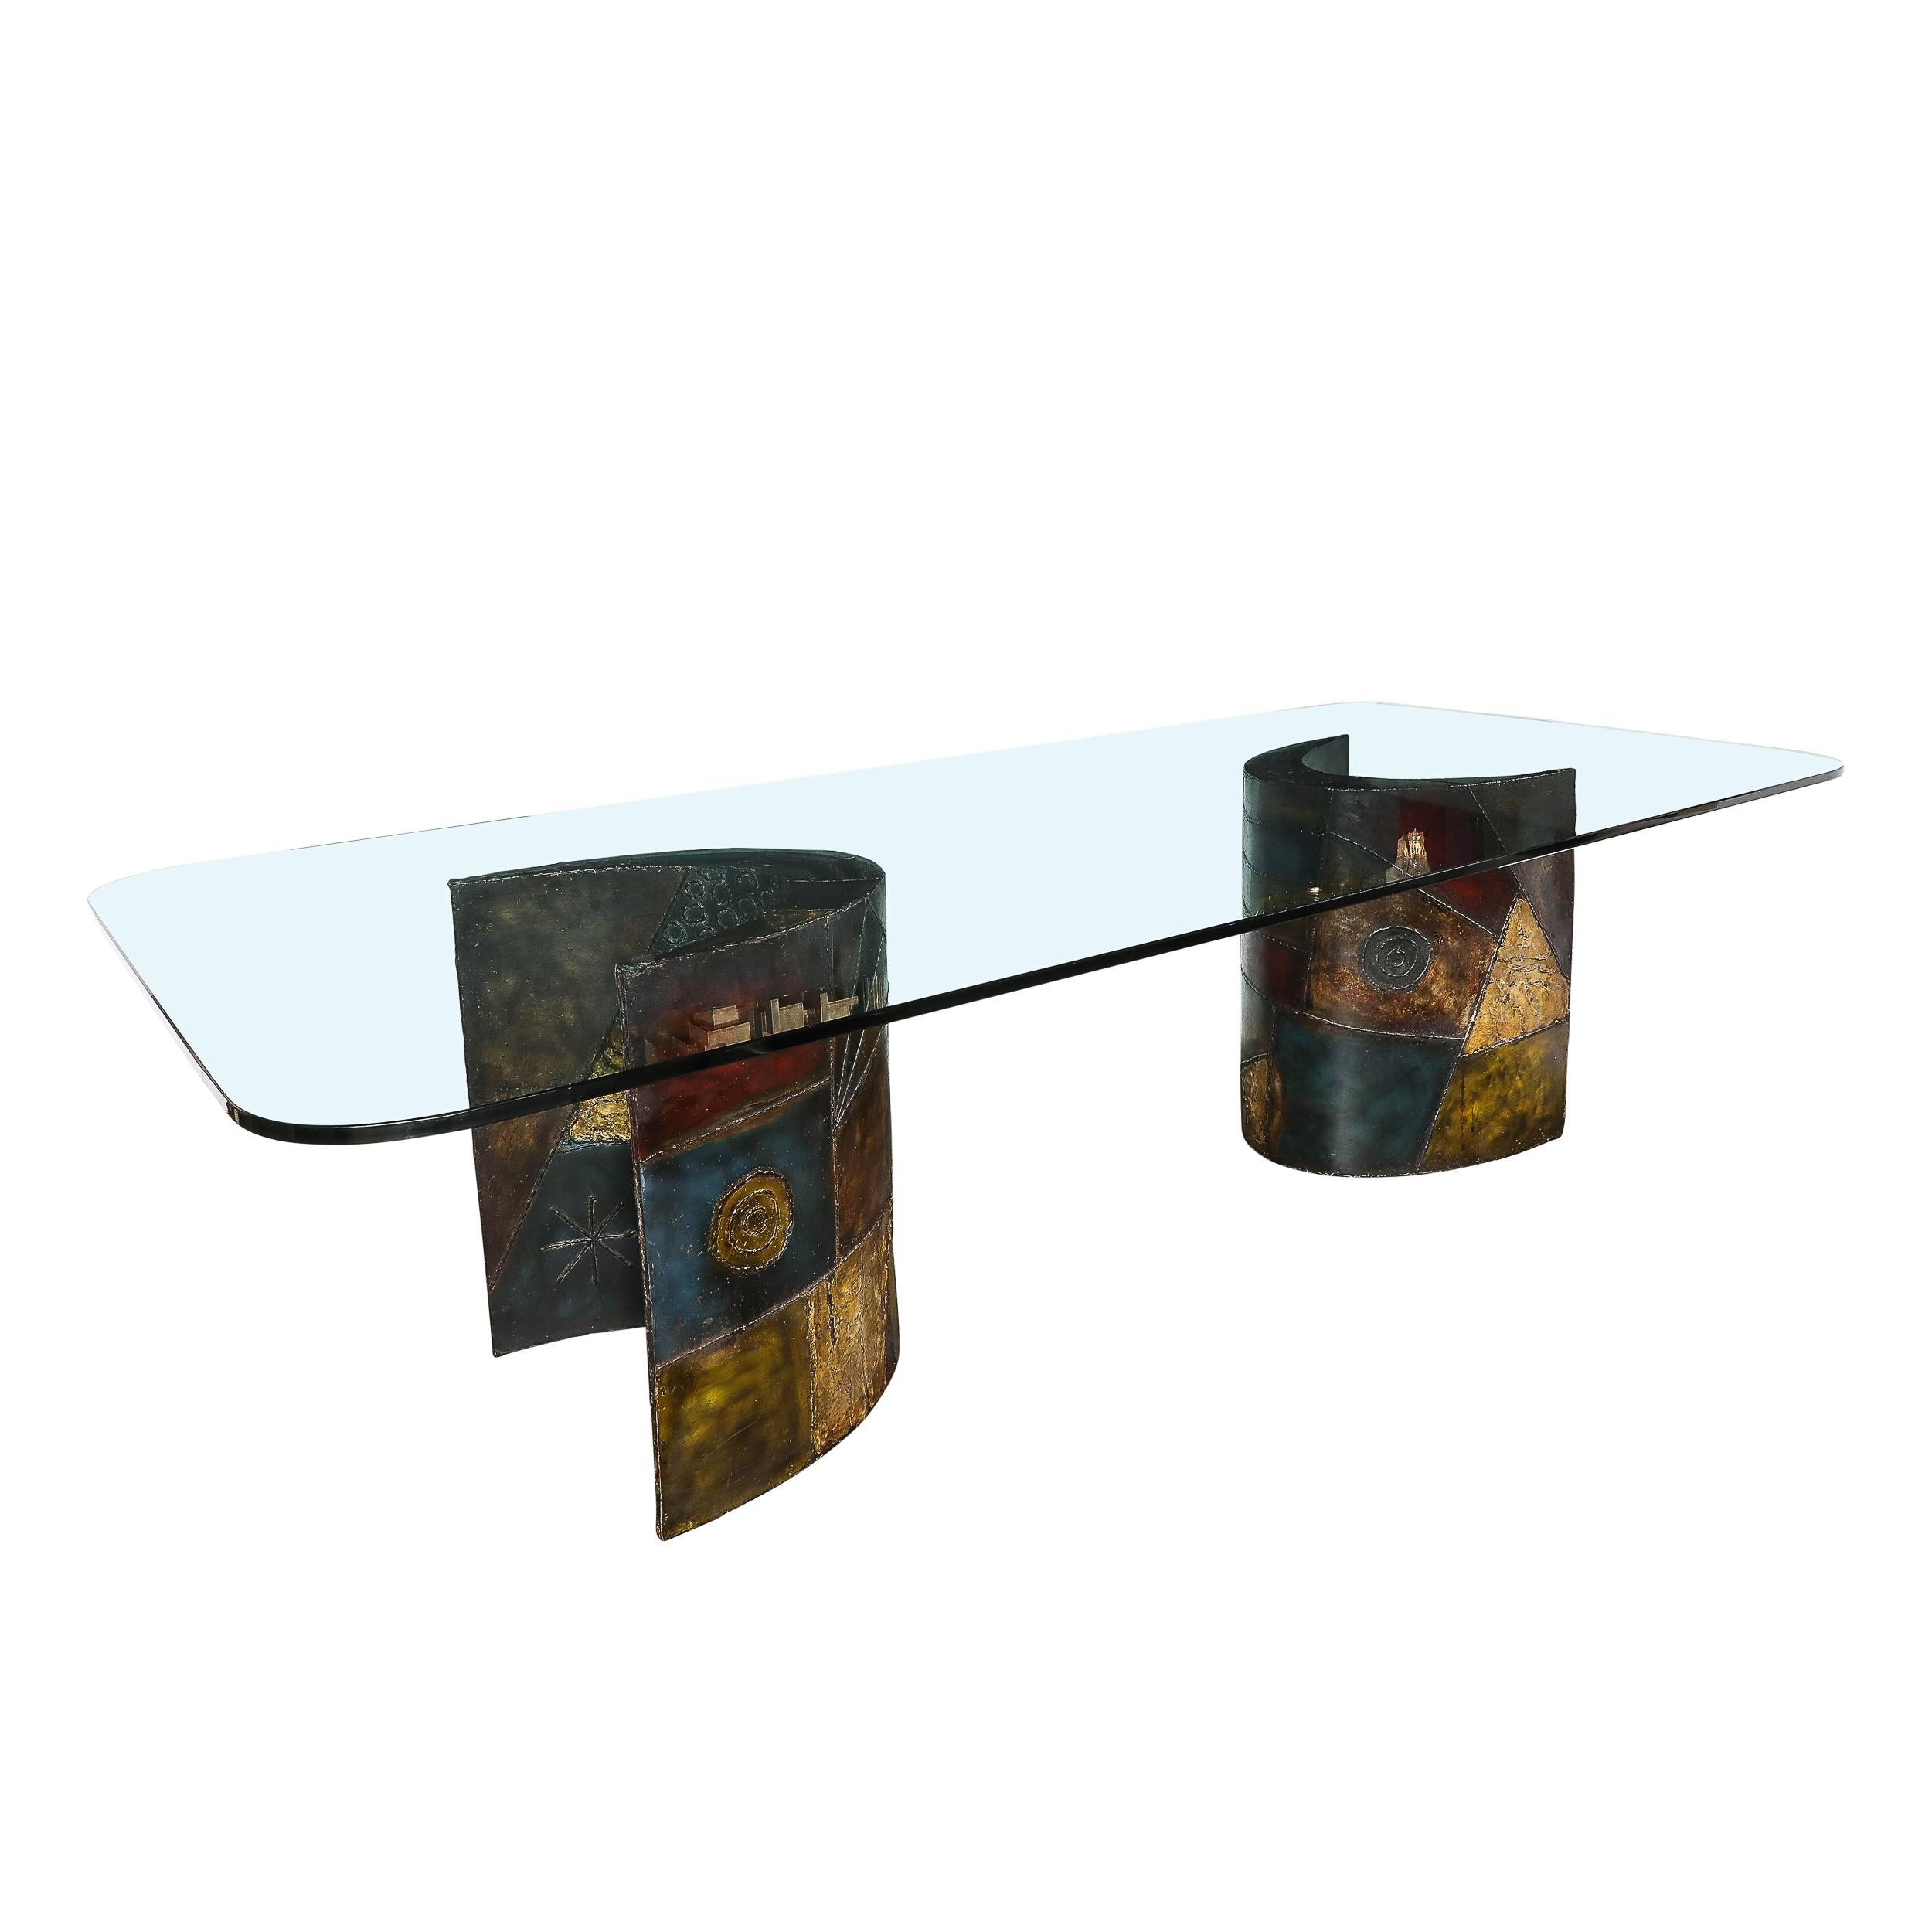 This monumental and materially stunning Signed & Dated Mid-Century Modernist Brutalist Paul Evans for Directional Dining Table originates from the United States, Circa 1970. Features a substantial glass top resting upon two horsehoe shaped supports